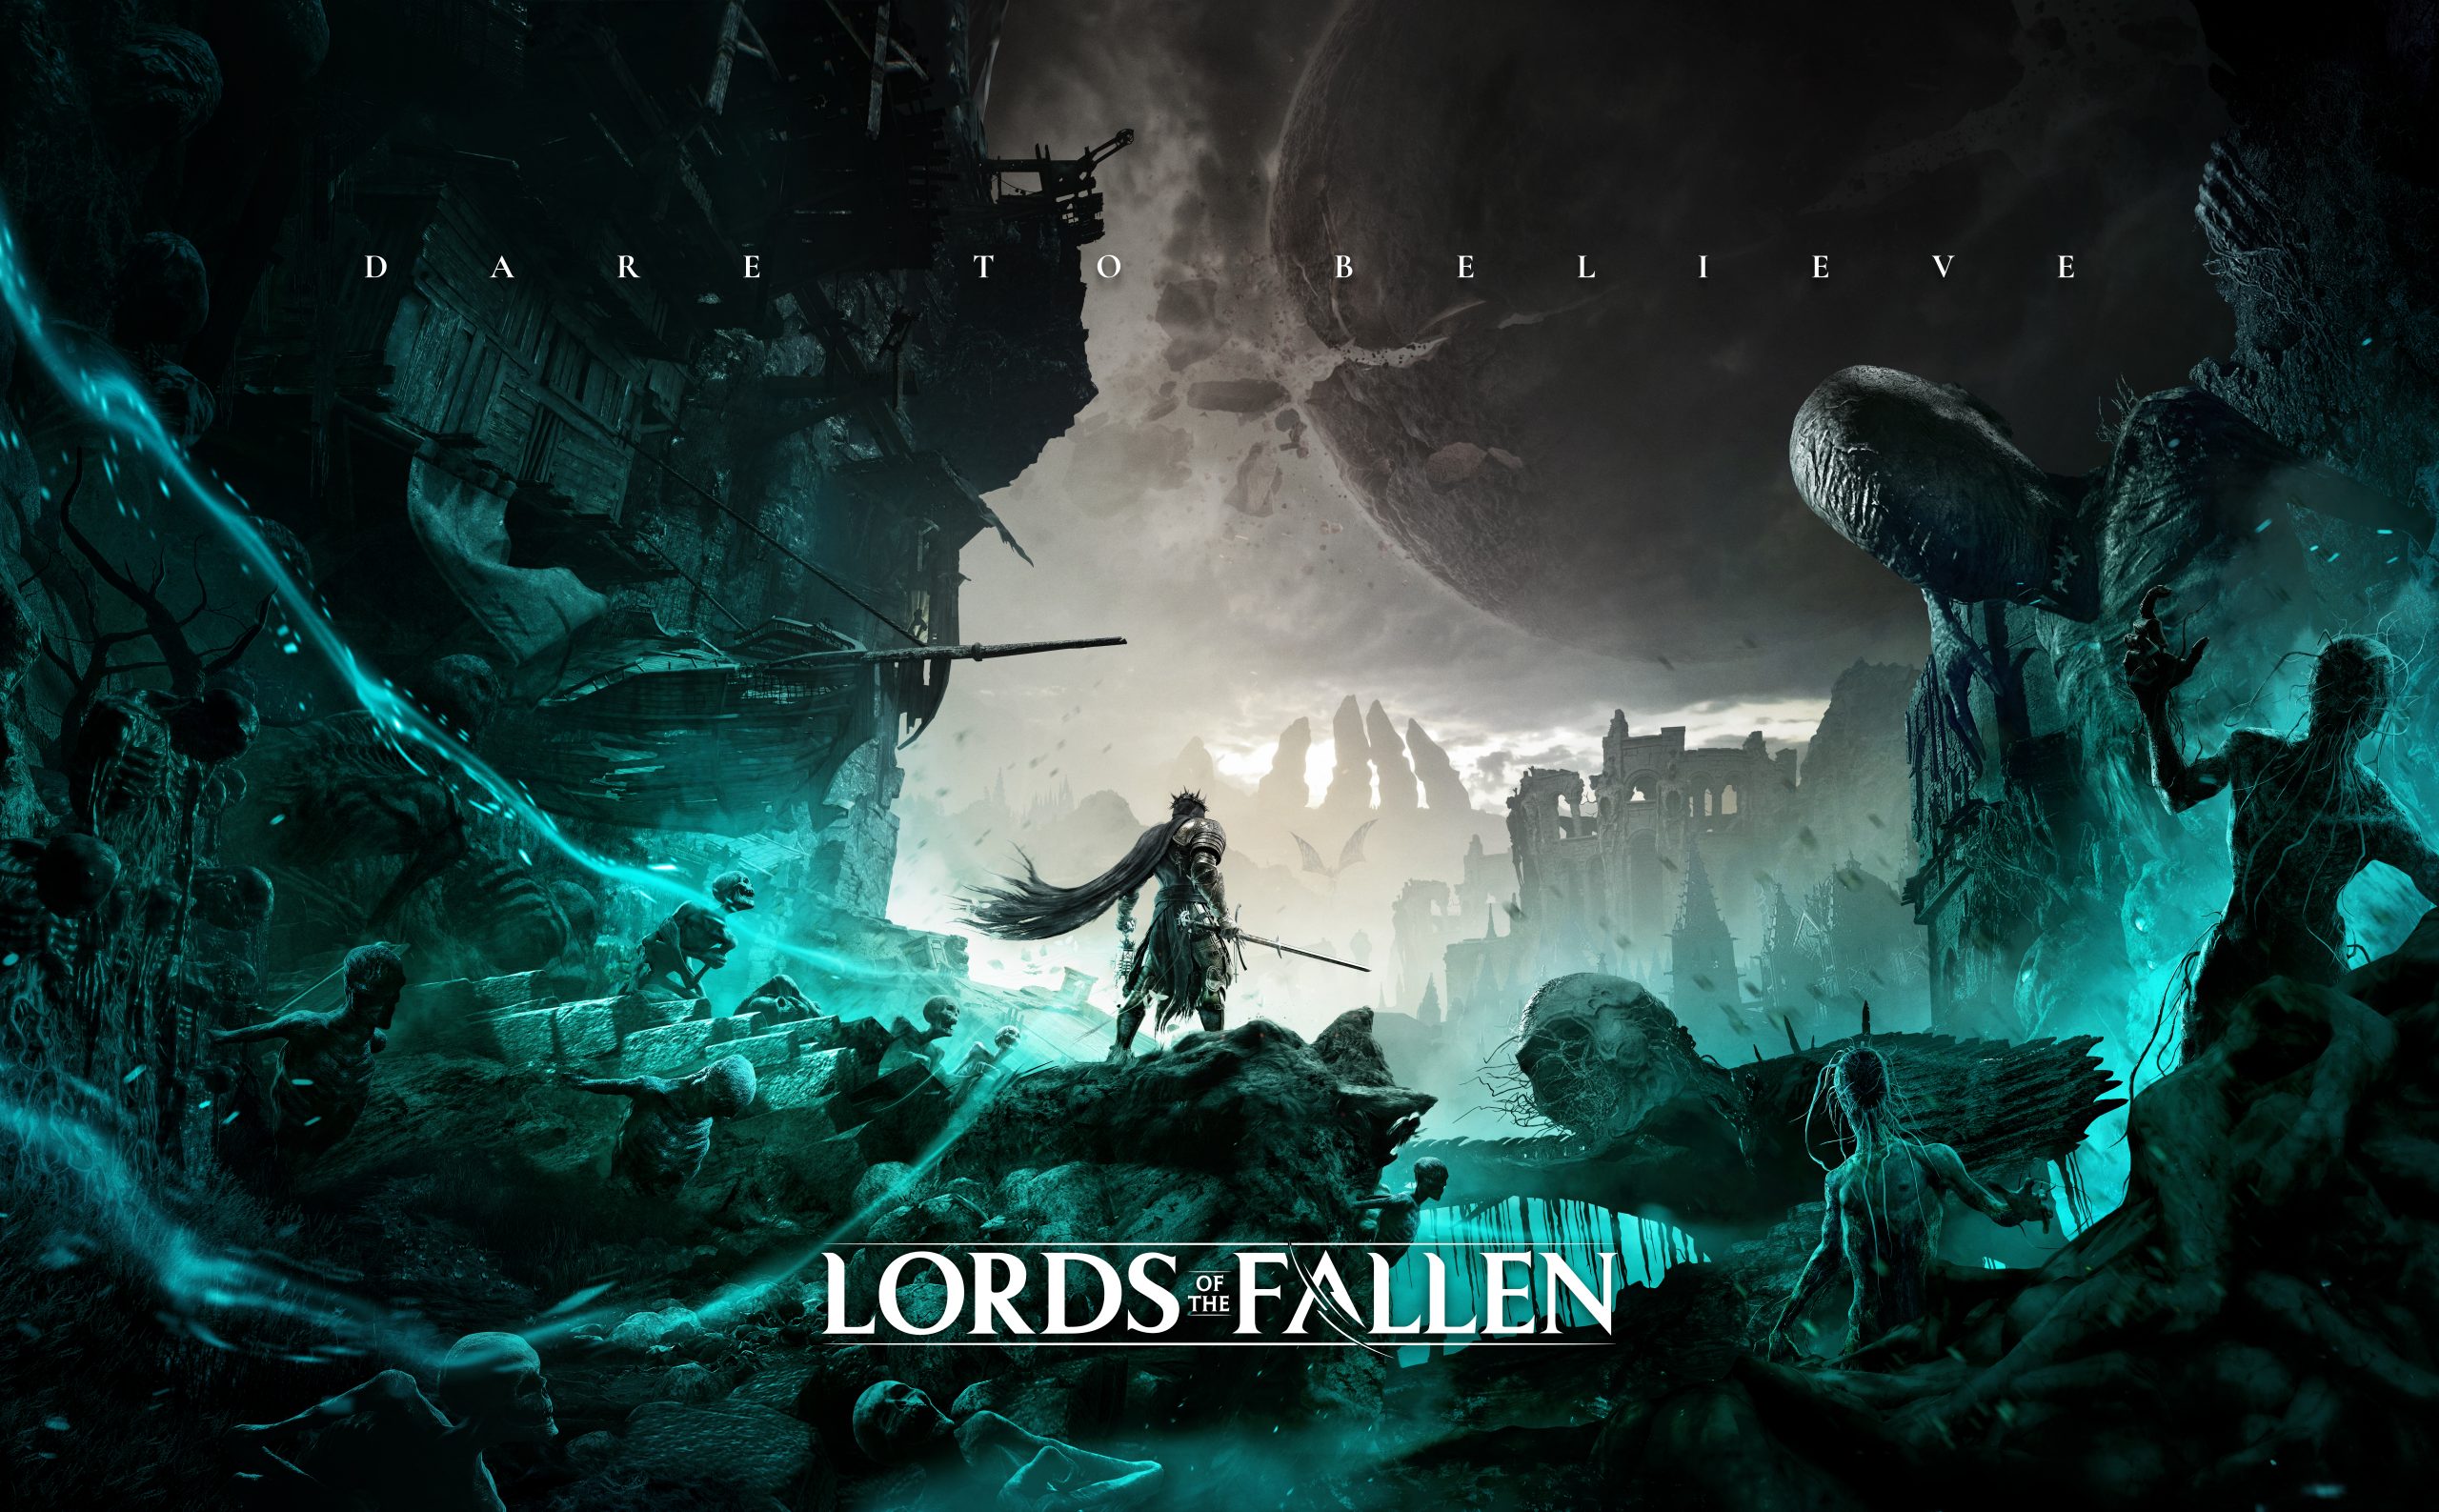 Lords of the Fallen Sells 1 Million Units Worldwide